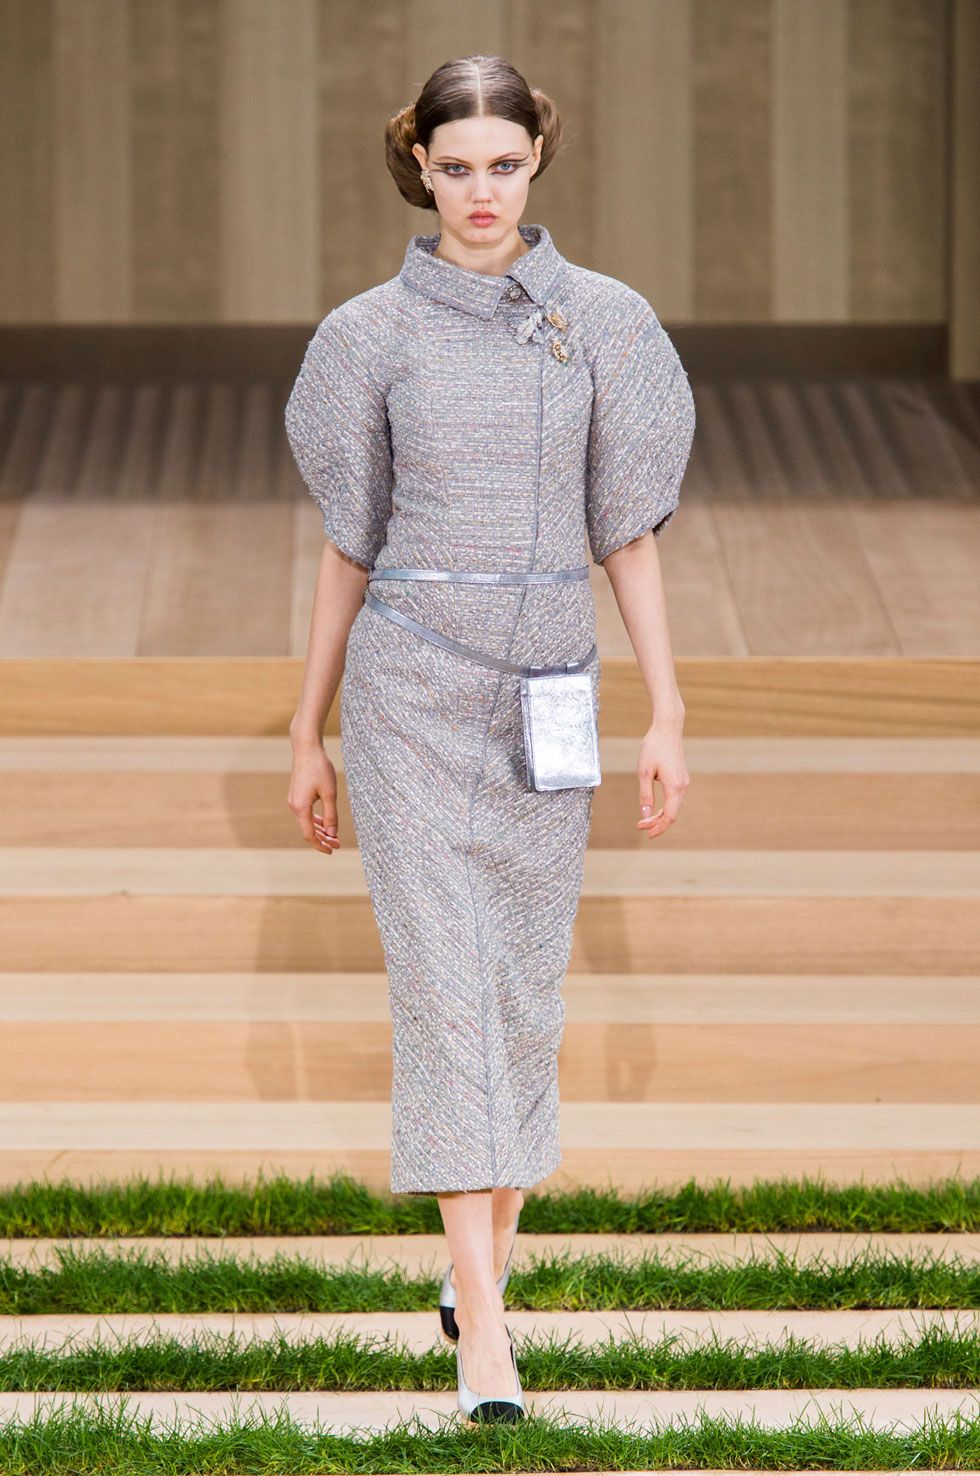 WOMEN'S SPRING-SUMMER 2016 SHOW: LOOKS FROM THE COLLECTION - News